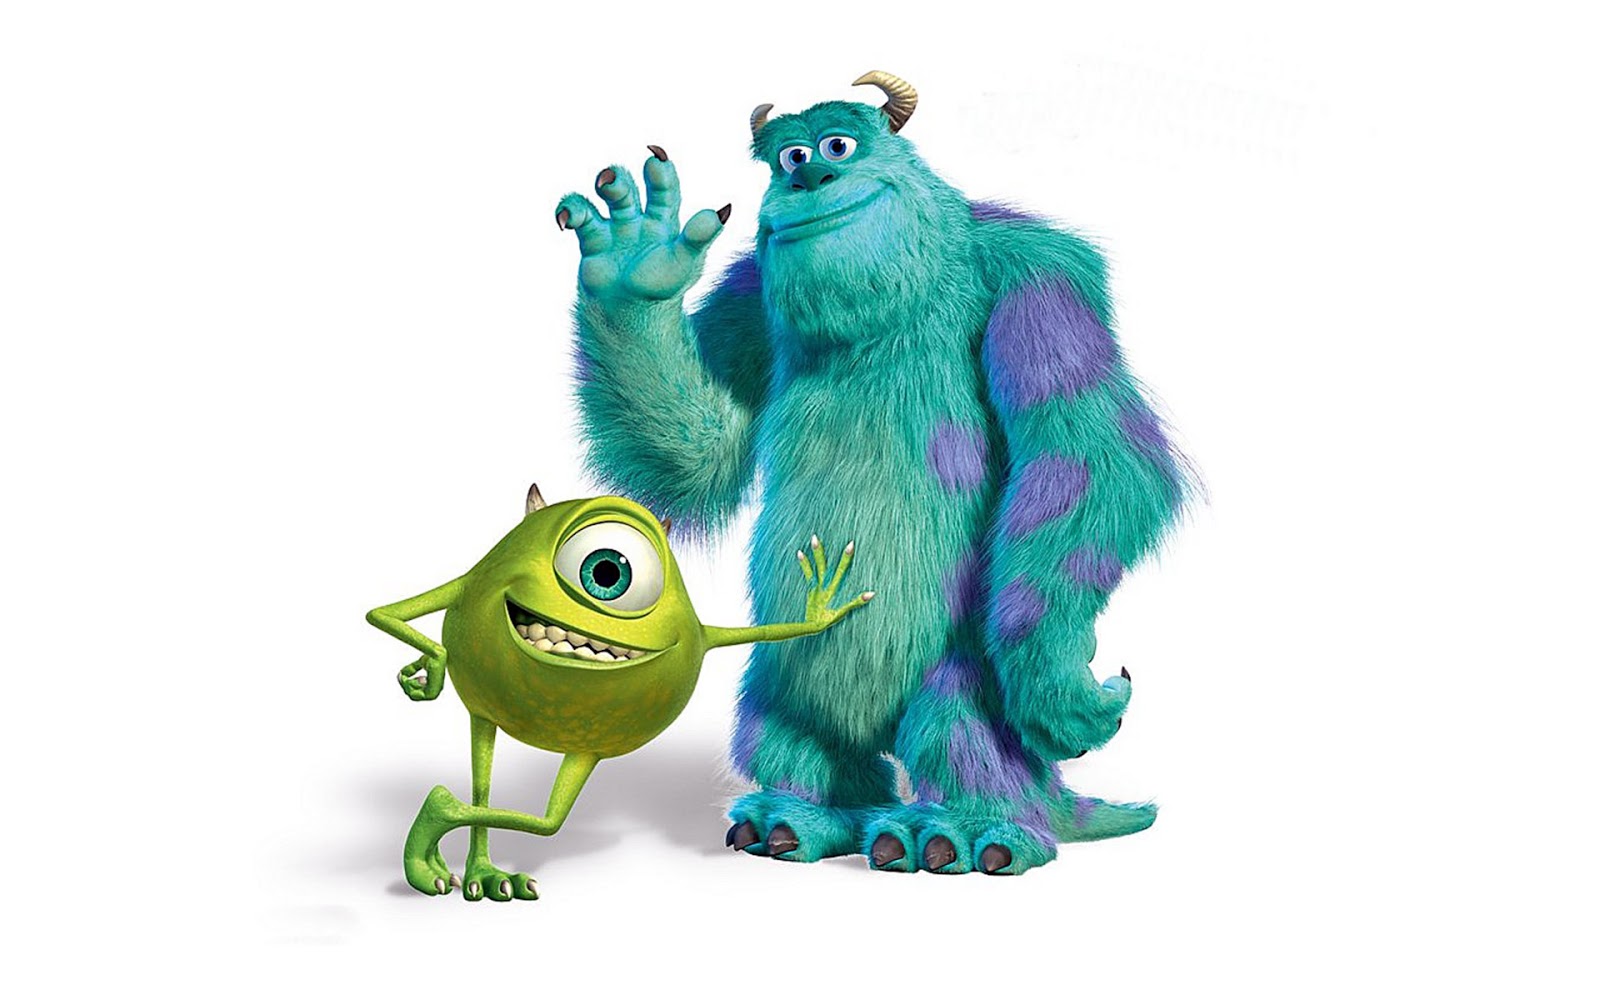 Amazing Monsters, Inc. Pictures & Backgrounds